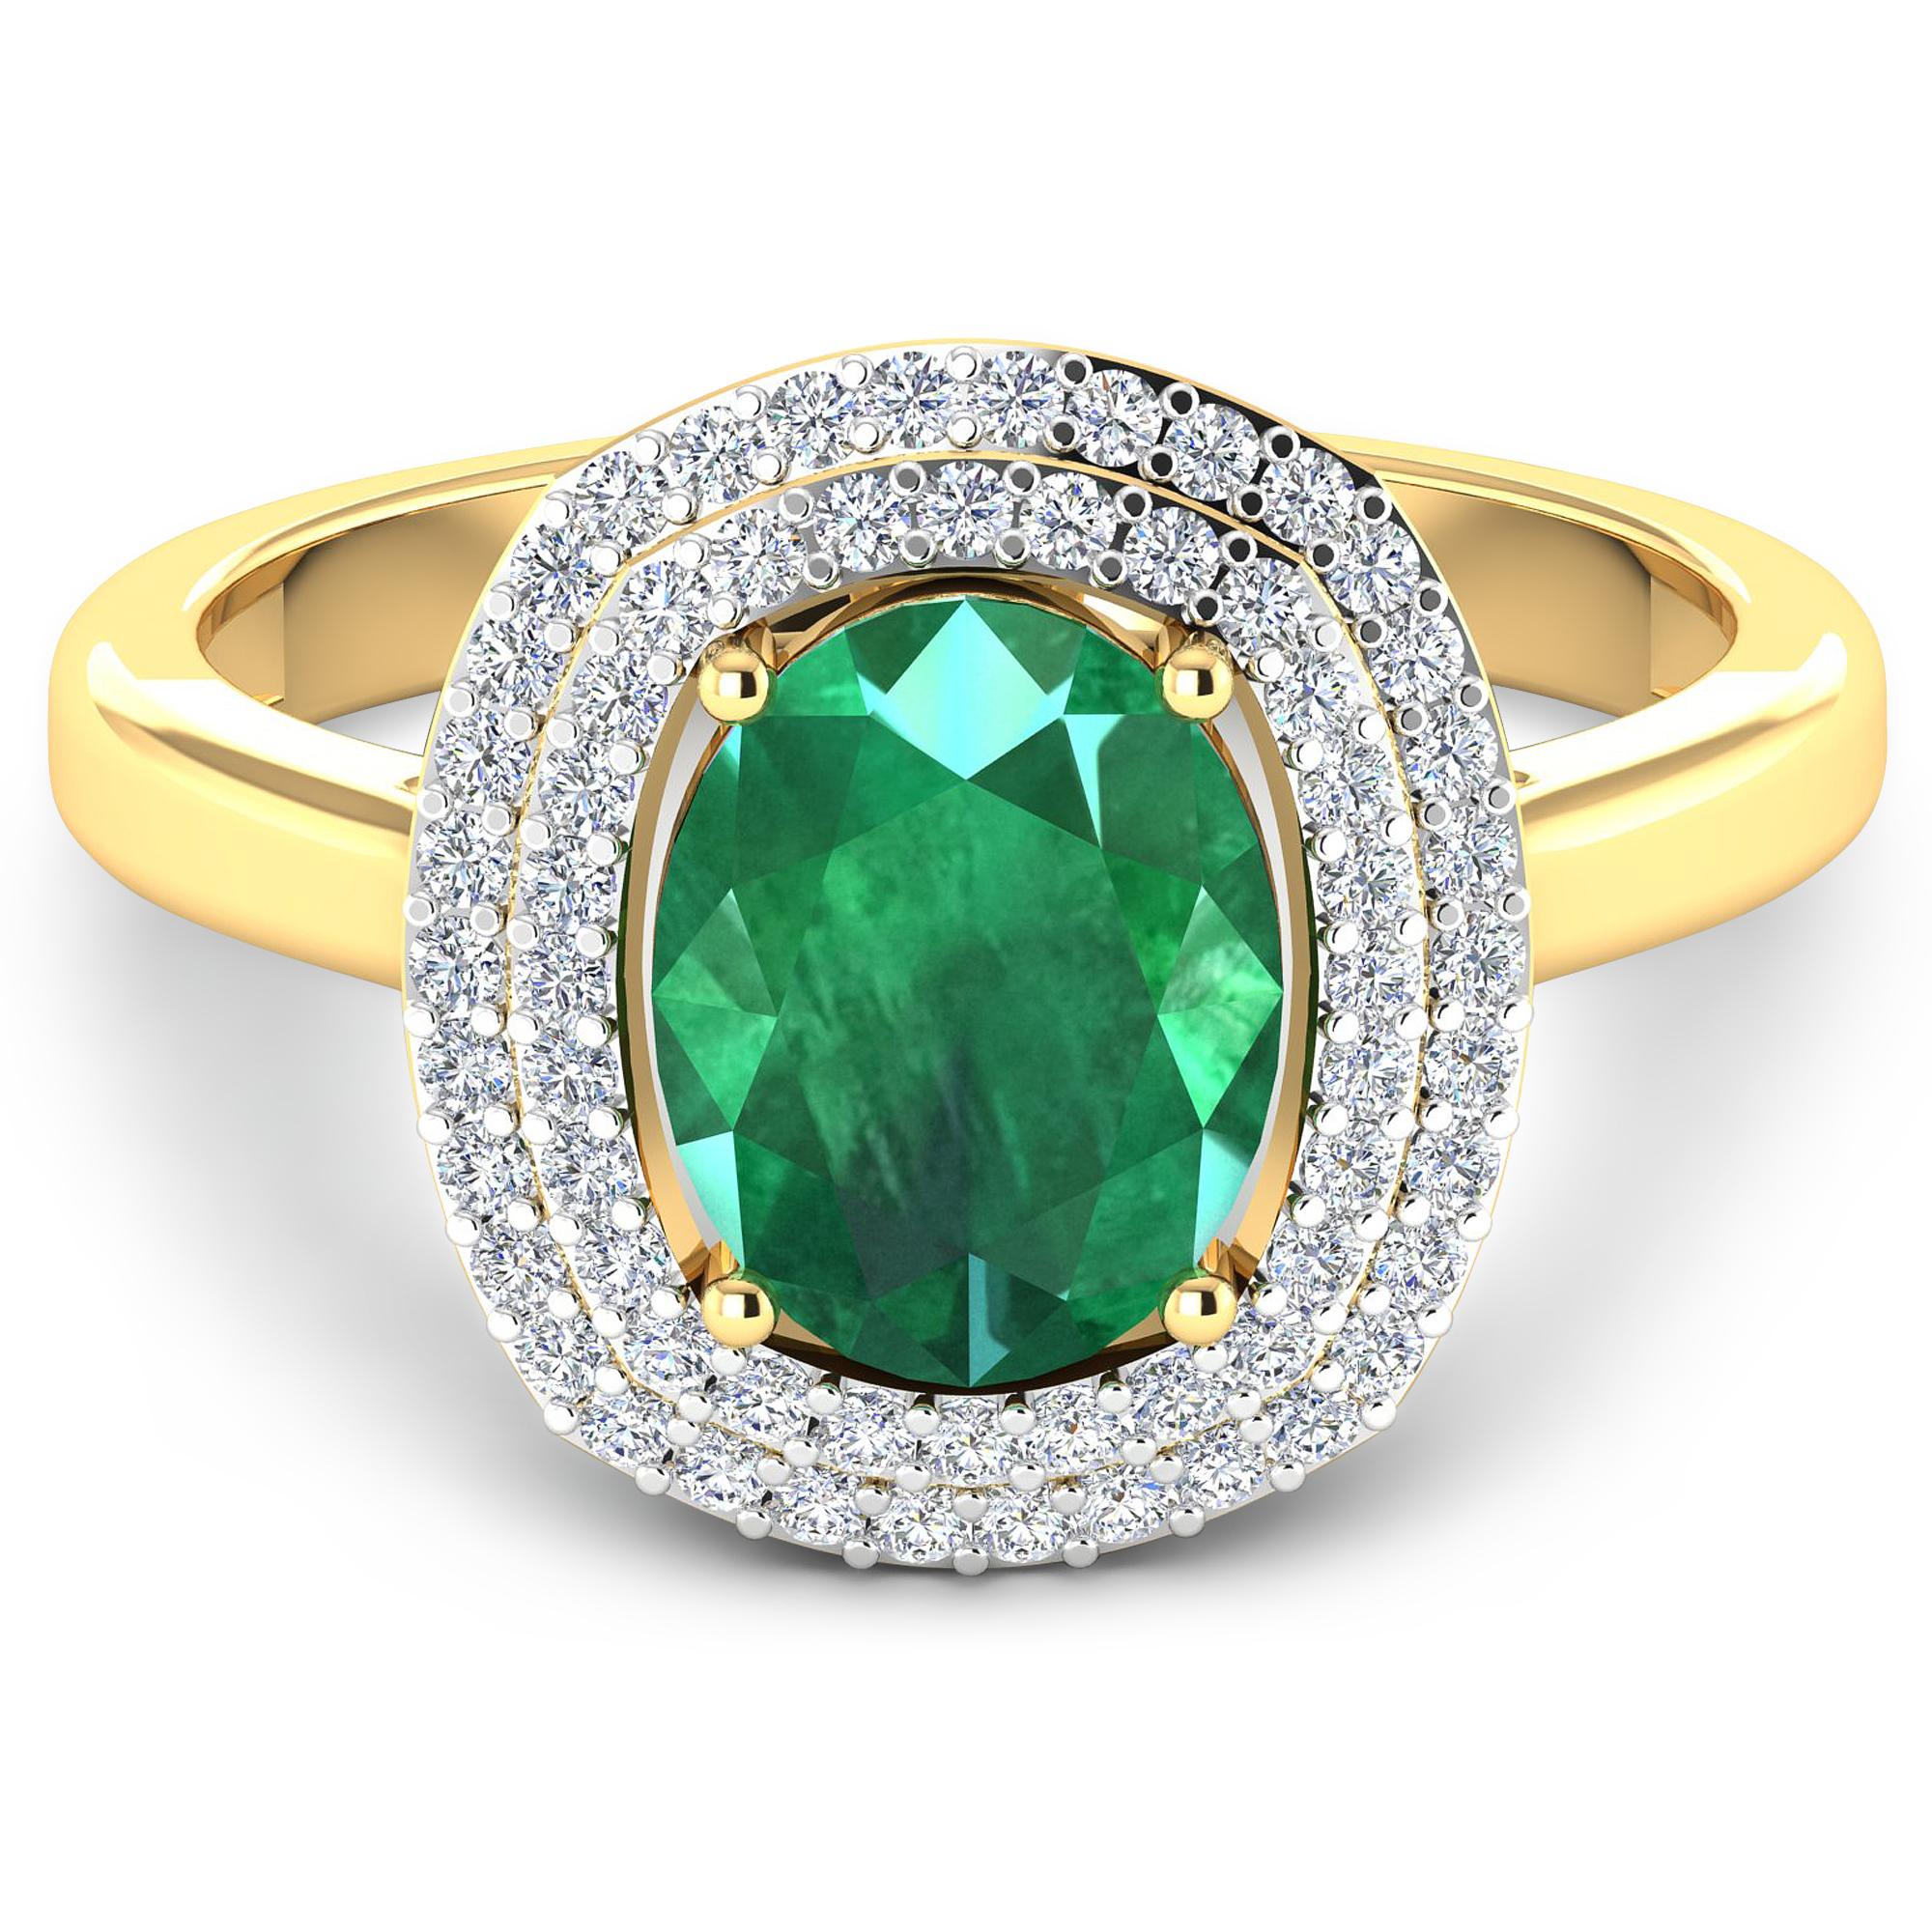 Oval Cut Emerald Gold Ring, 14 Karat Gold Emerald and Diamond Ring, 1.93 Carat For Sale